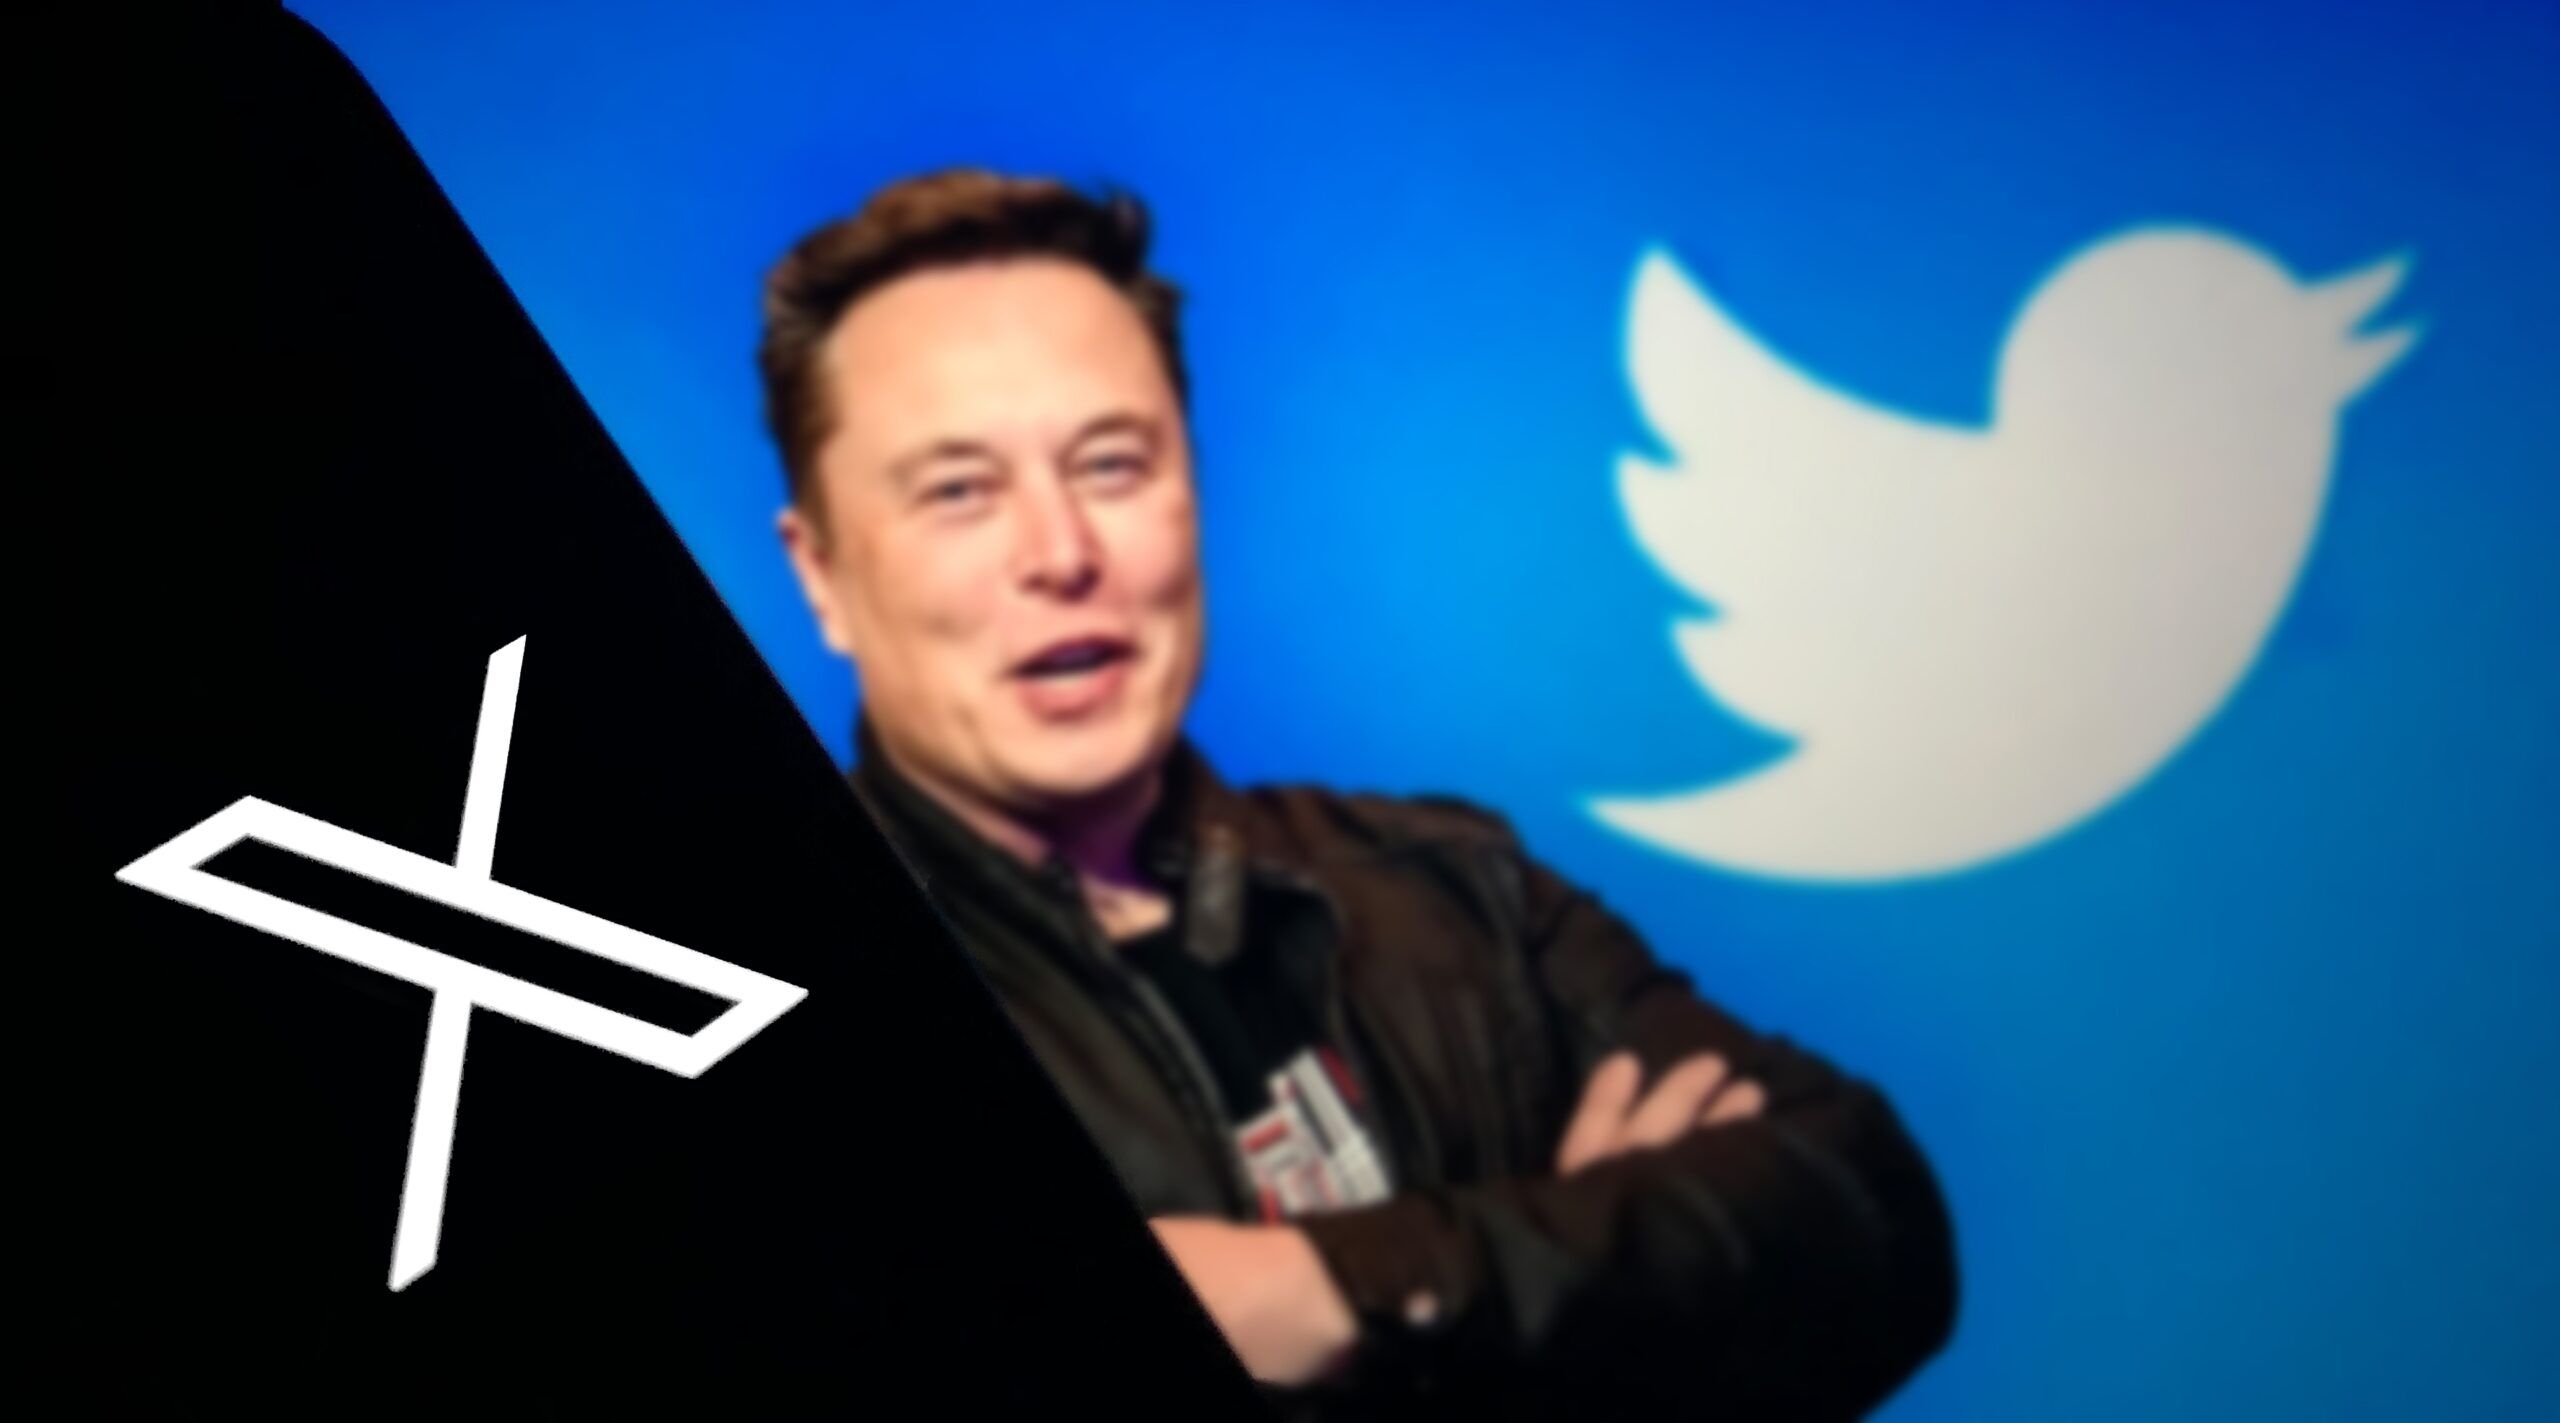 Elon Musk stands between the logos for X and Twitter